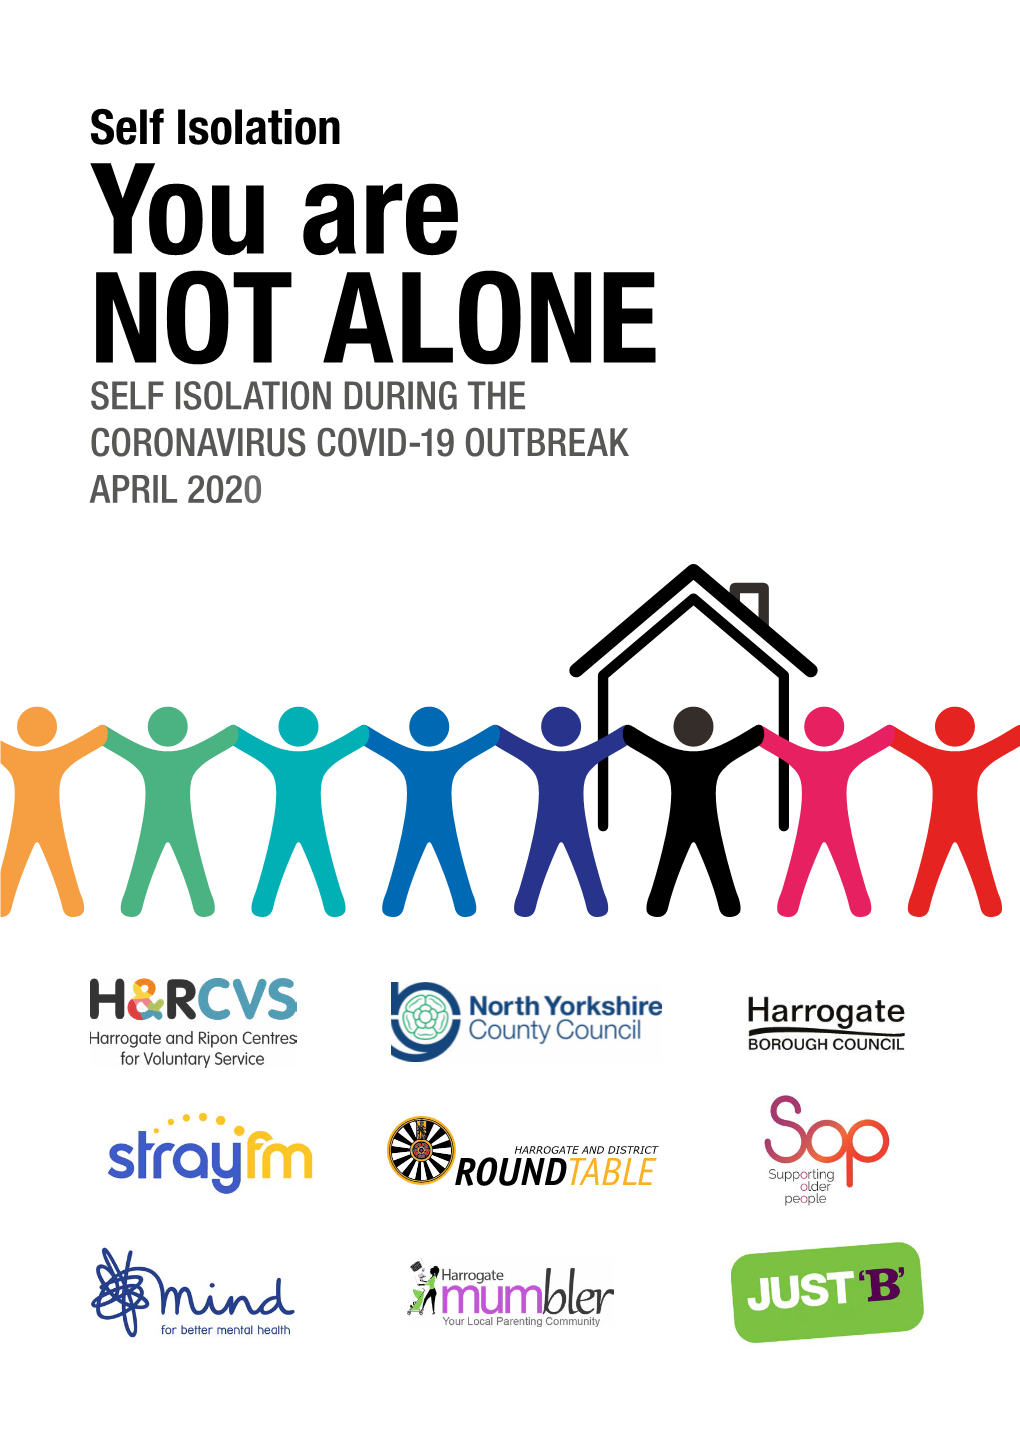 You Are NOT ALONE SELF ISOLATION DURING the CORONAVIRUS COVID-19 OUTBREAK APRIL 2020